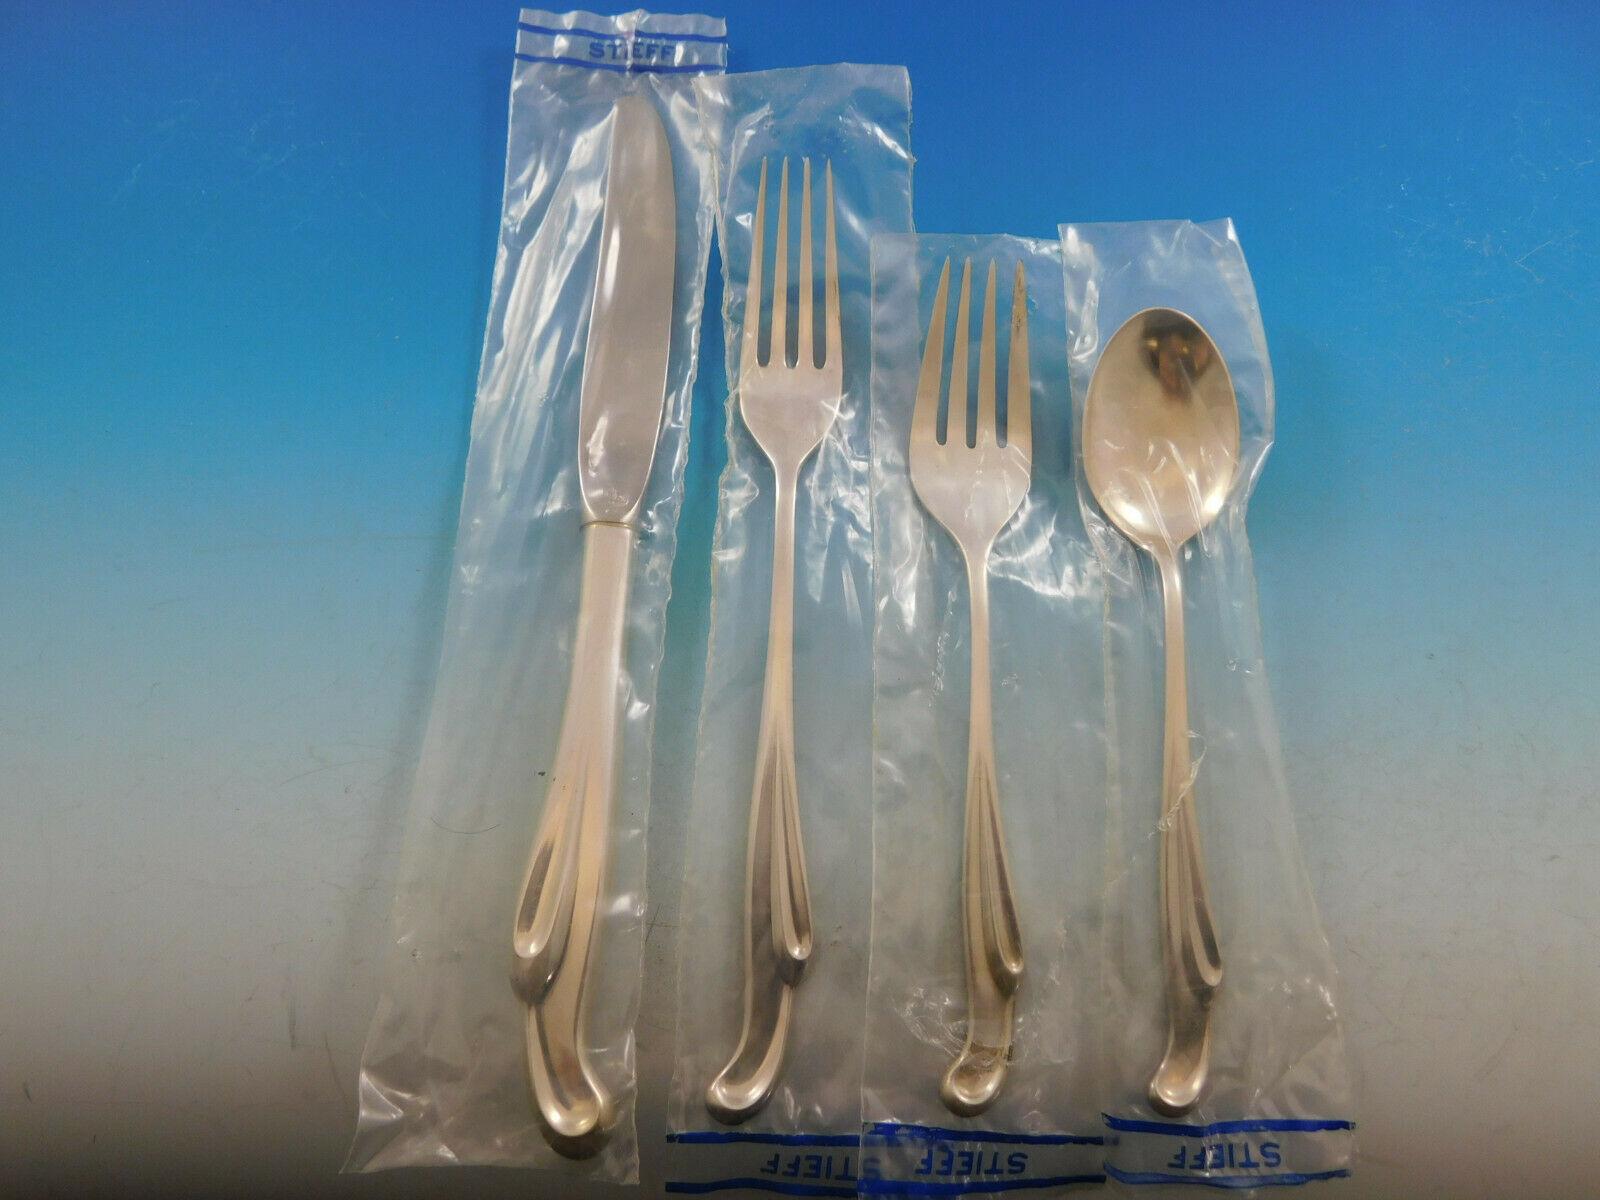 Unused SILVER SURF BY STIEFF sterling silver Flatware set, 48 pieces, circa 1956. The flowing quality of the silver is expressed in this Mid-Century Modern design. This set includes:

12 Knives, 9